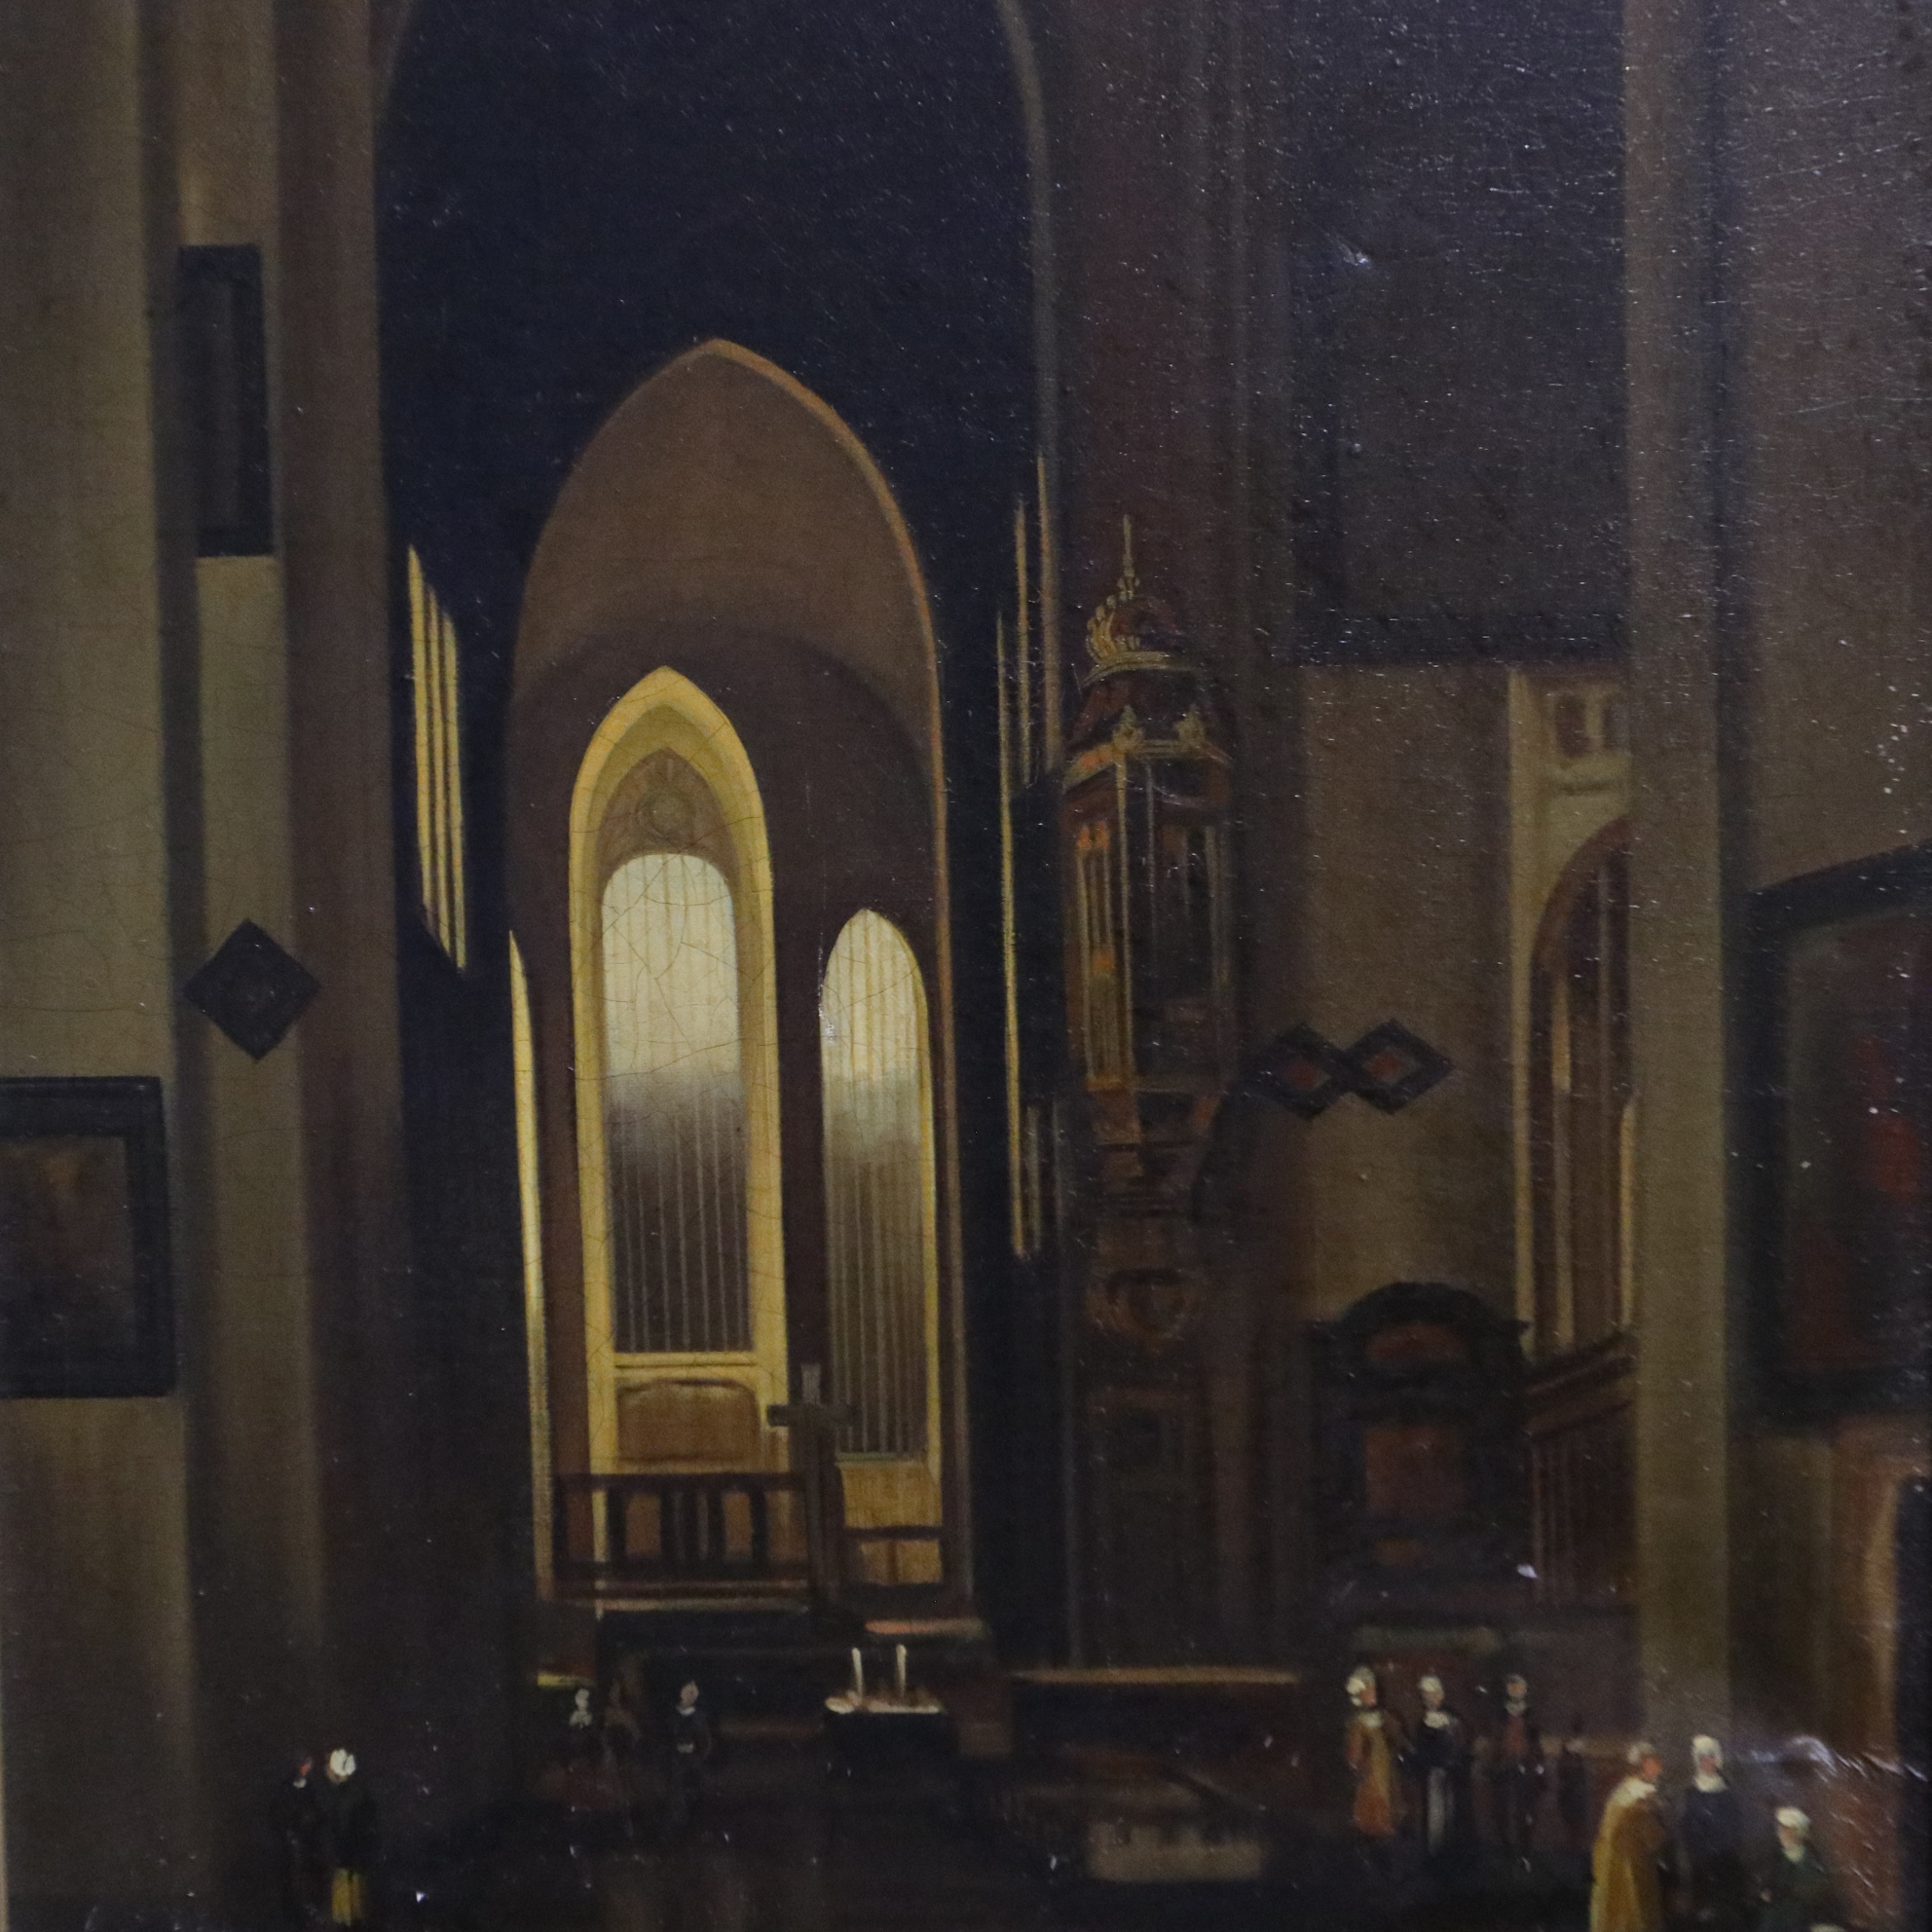 Thomas (late 19th/early 20th century): oil on canvas, cathedral interior with figures, 50 x 60 cm.